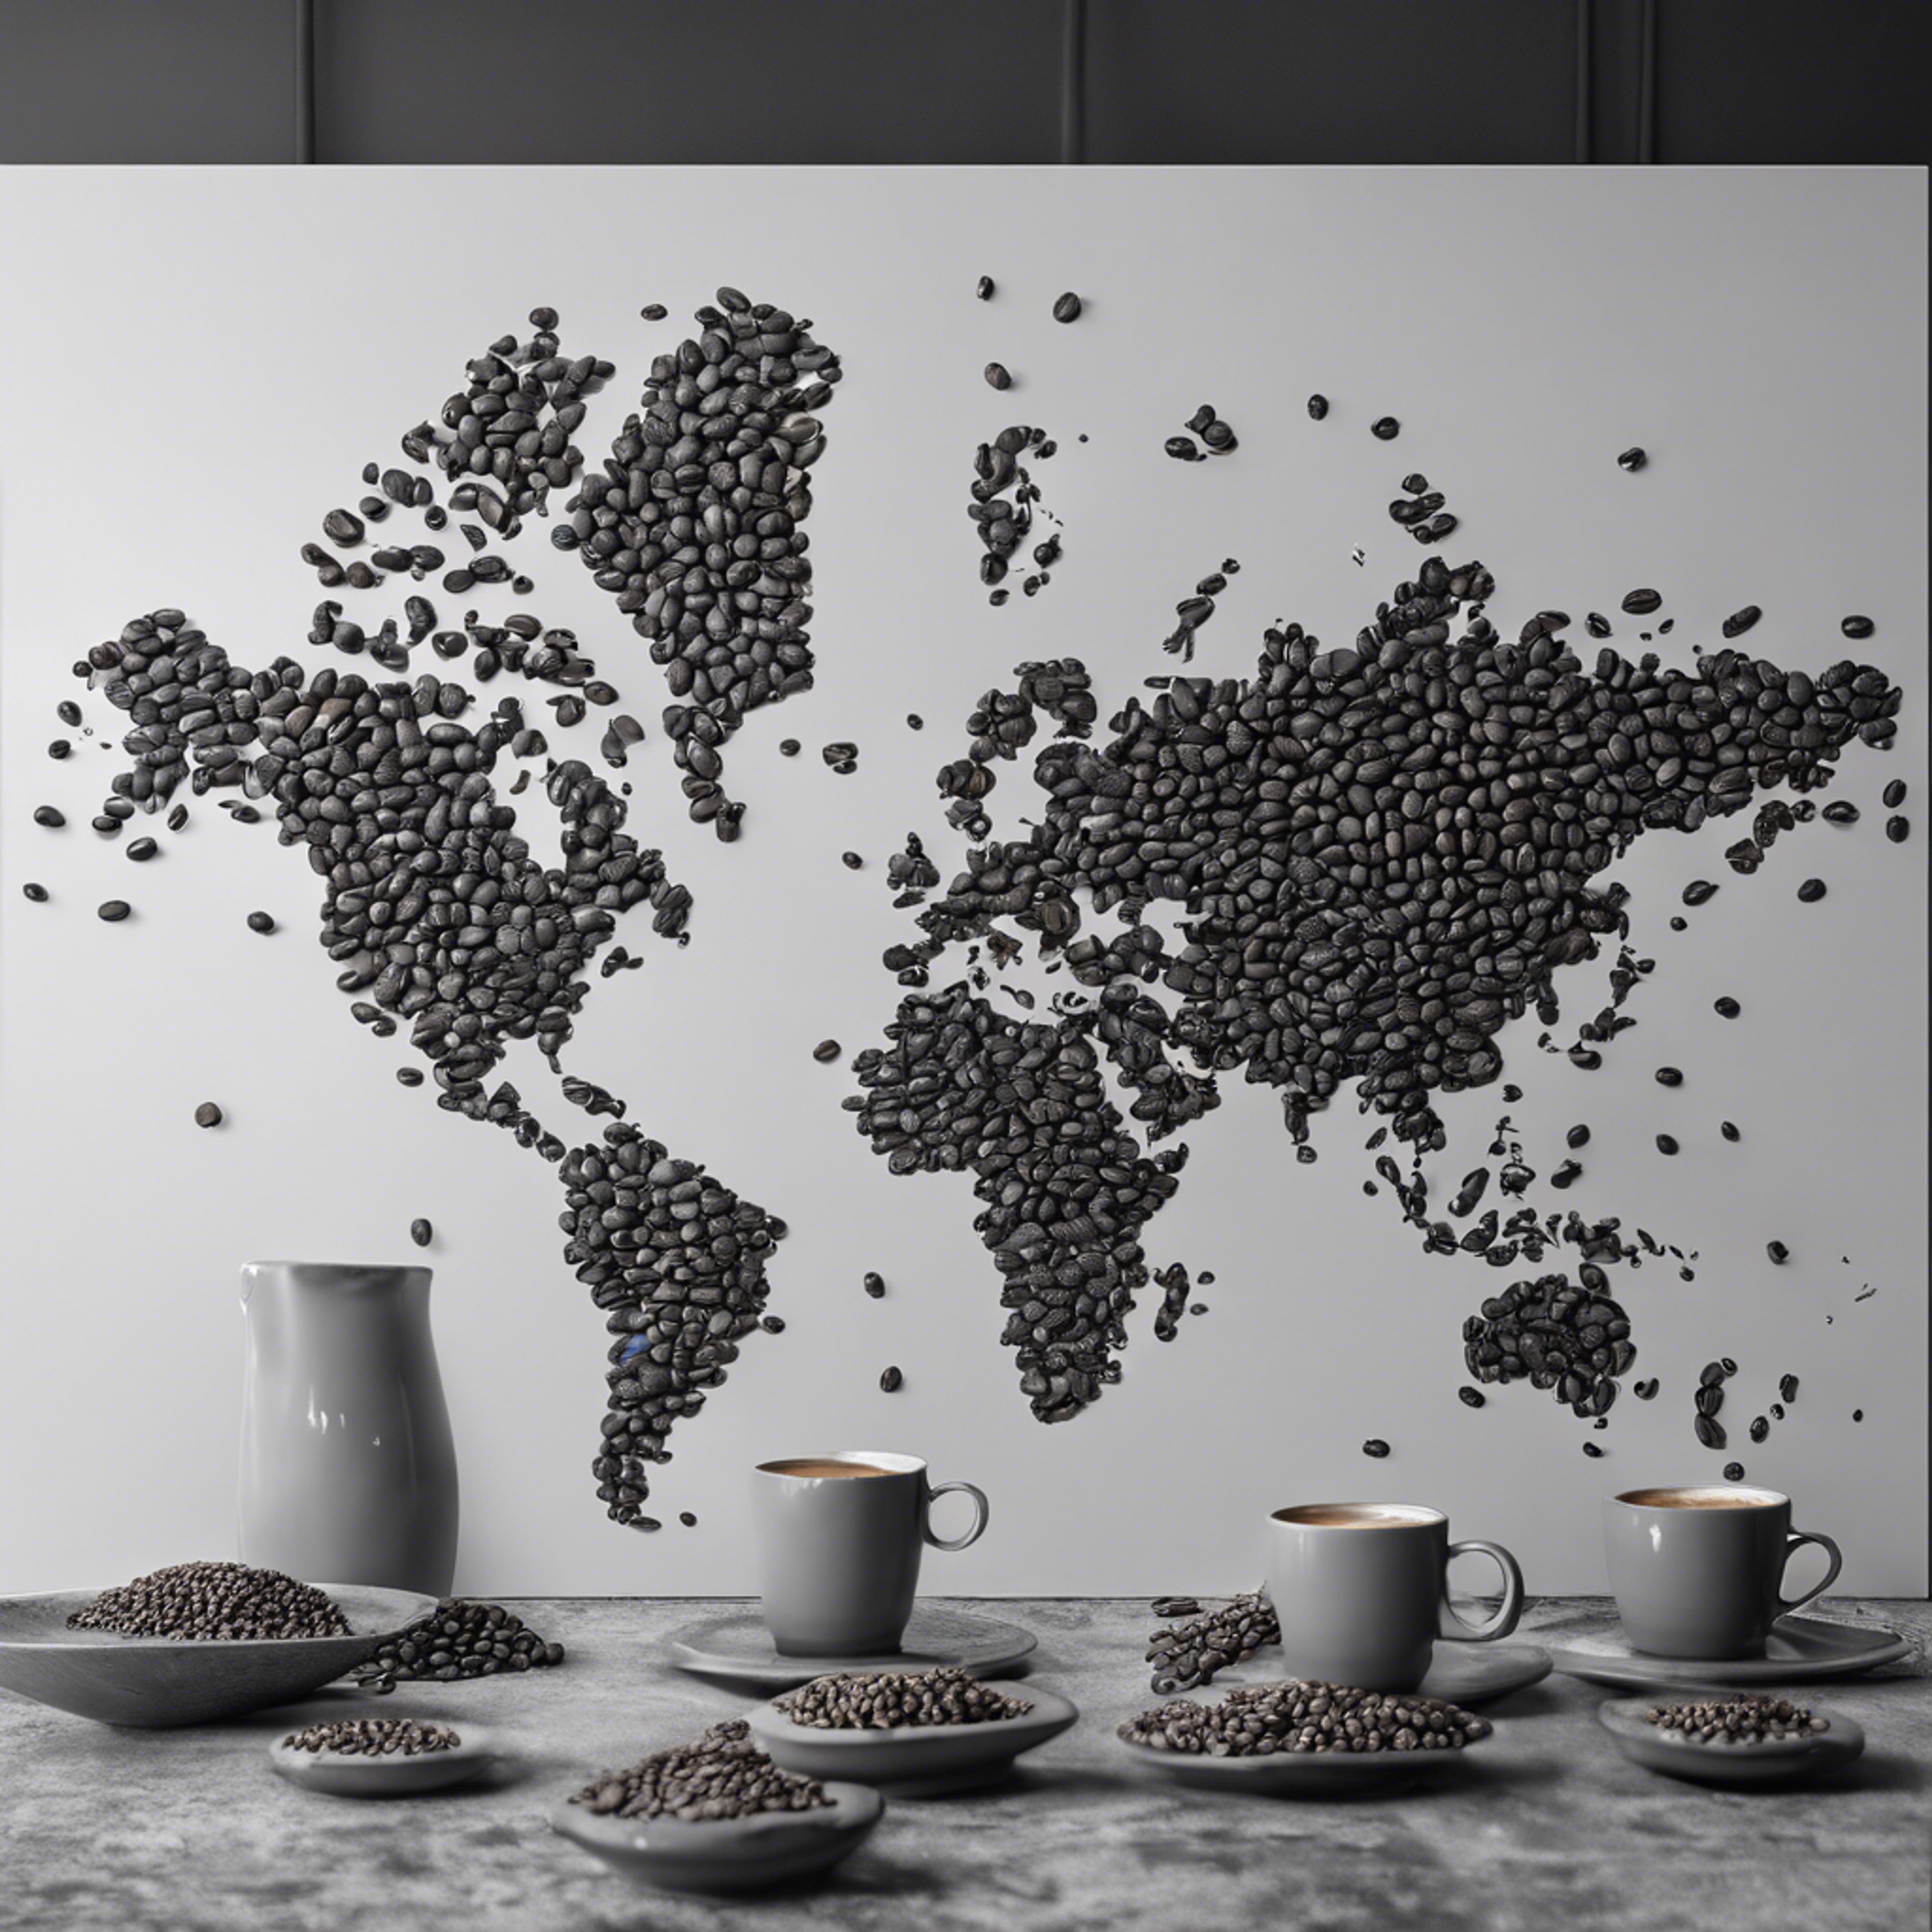 A grayscale world map laid out with coffee beans on a cafe table. 墙纸[a42175c9d73a43528667]